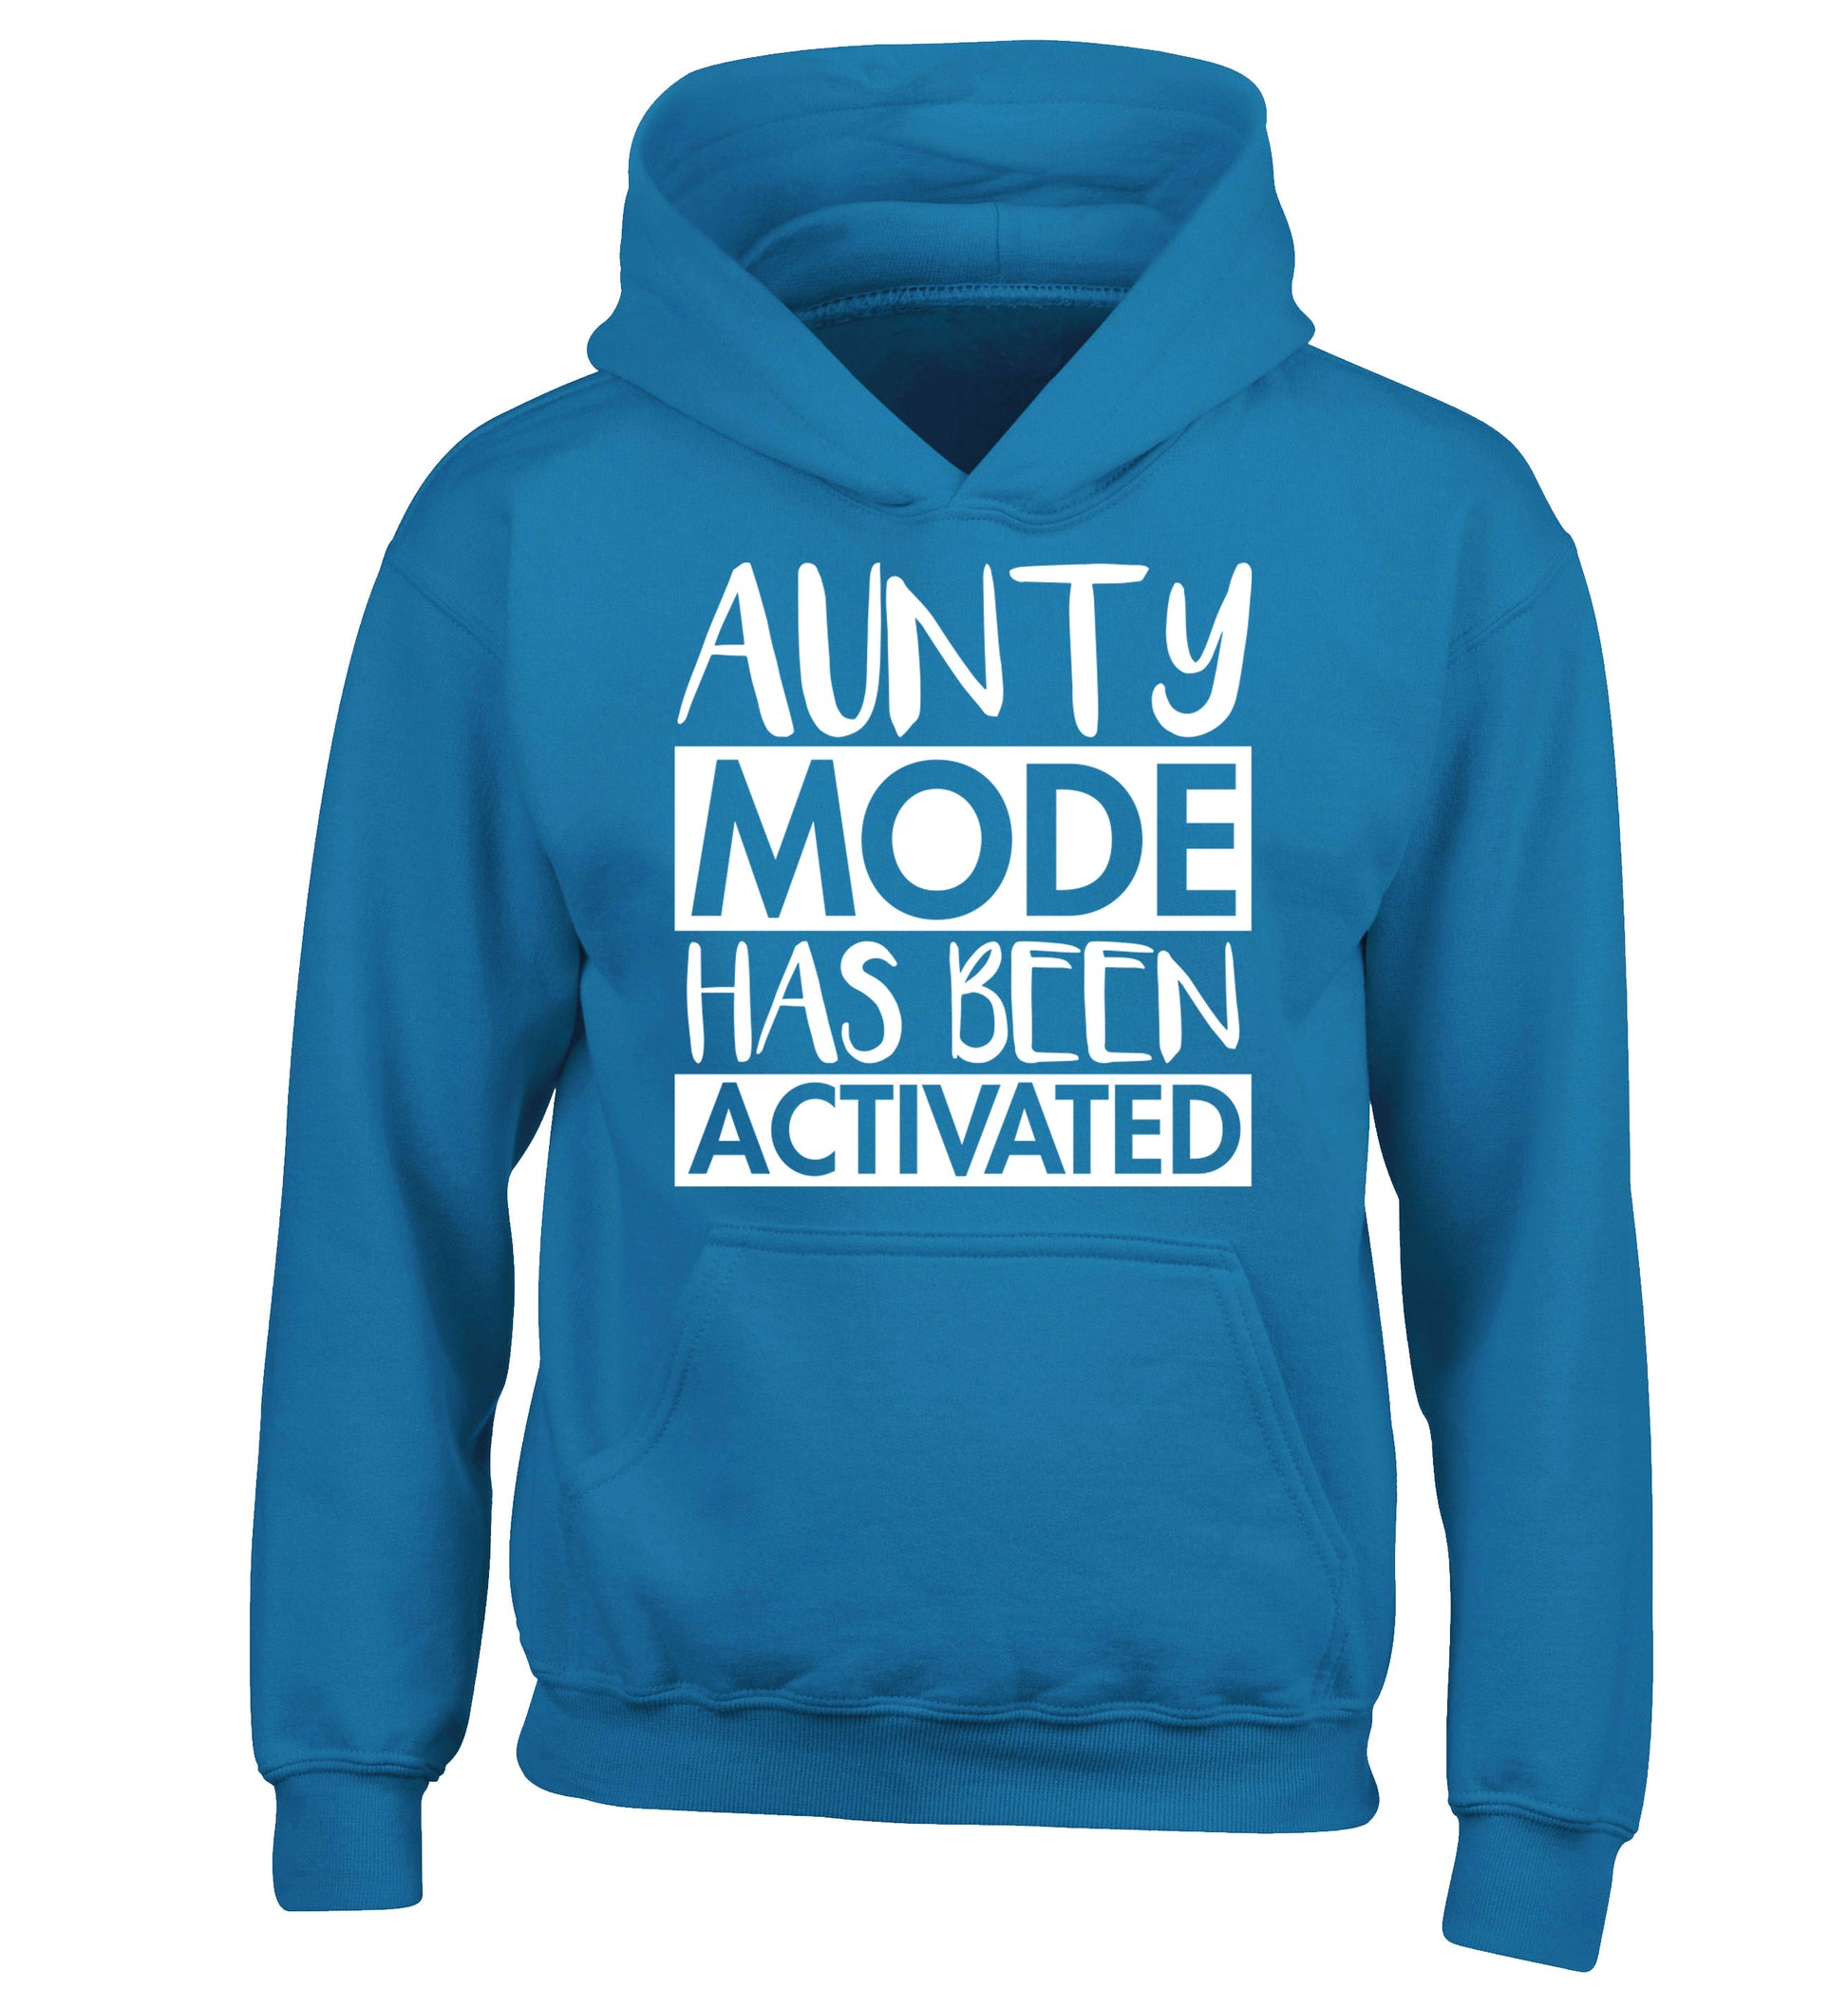 Aunty mode activated children's blue hoodie 12-14 Years